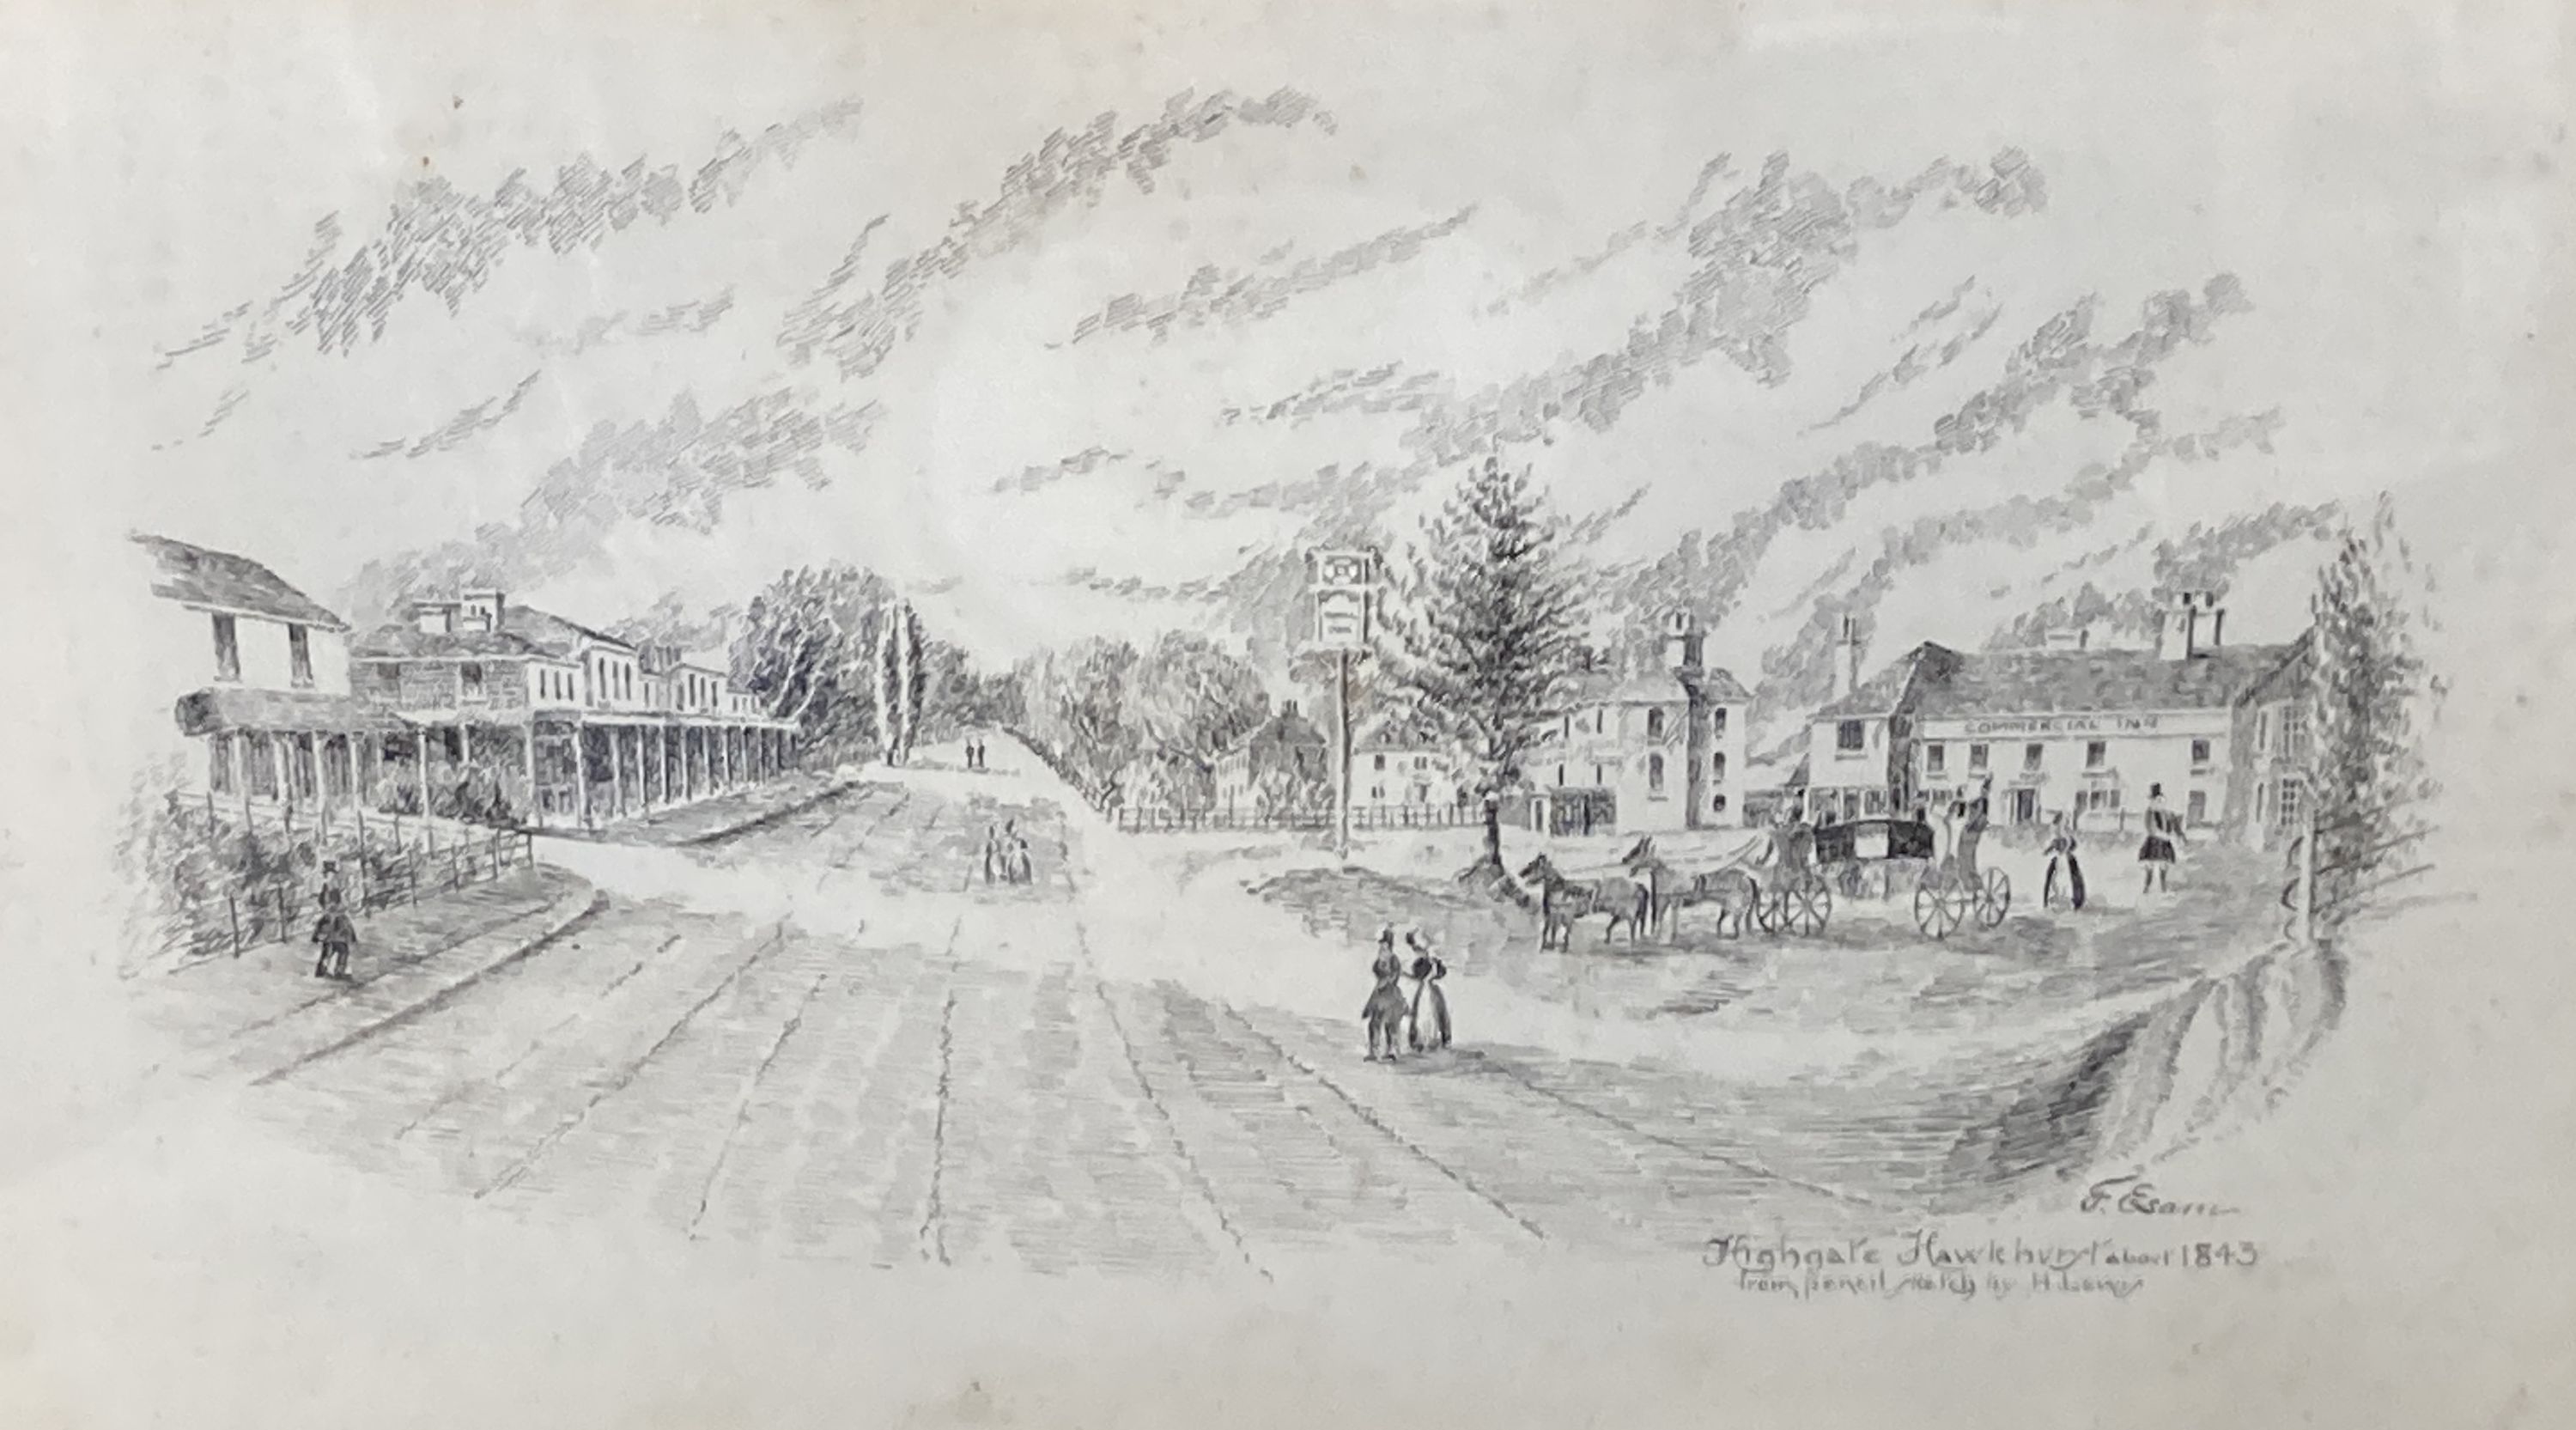 F. Esam c.1900, 5 pen and ink drawings: Highgate, Hawkhurst; Attwater; The Queens Hotel, Hawkhurst; St Lawrence Church, Hawkhurst and